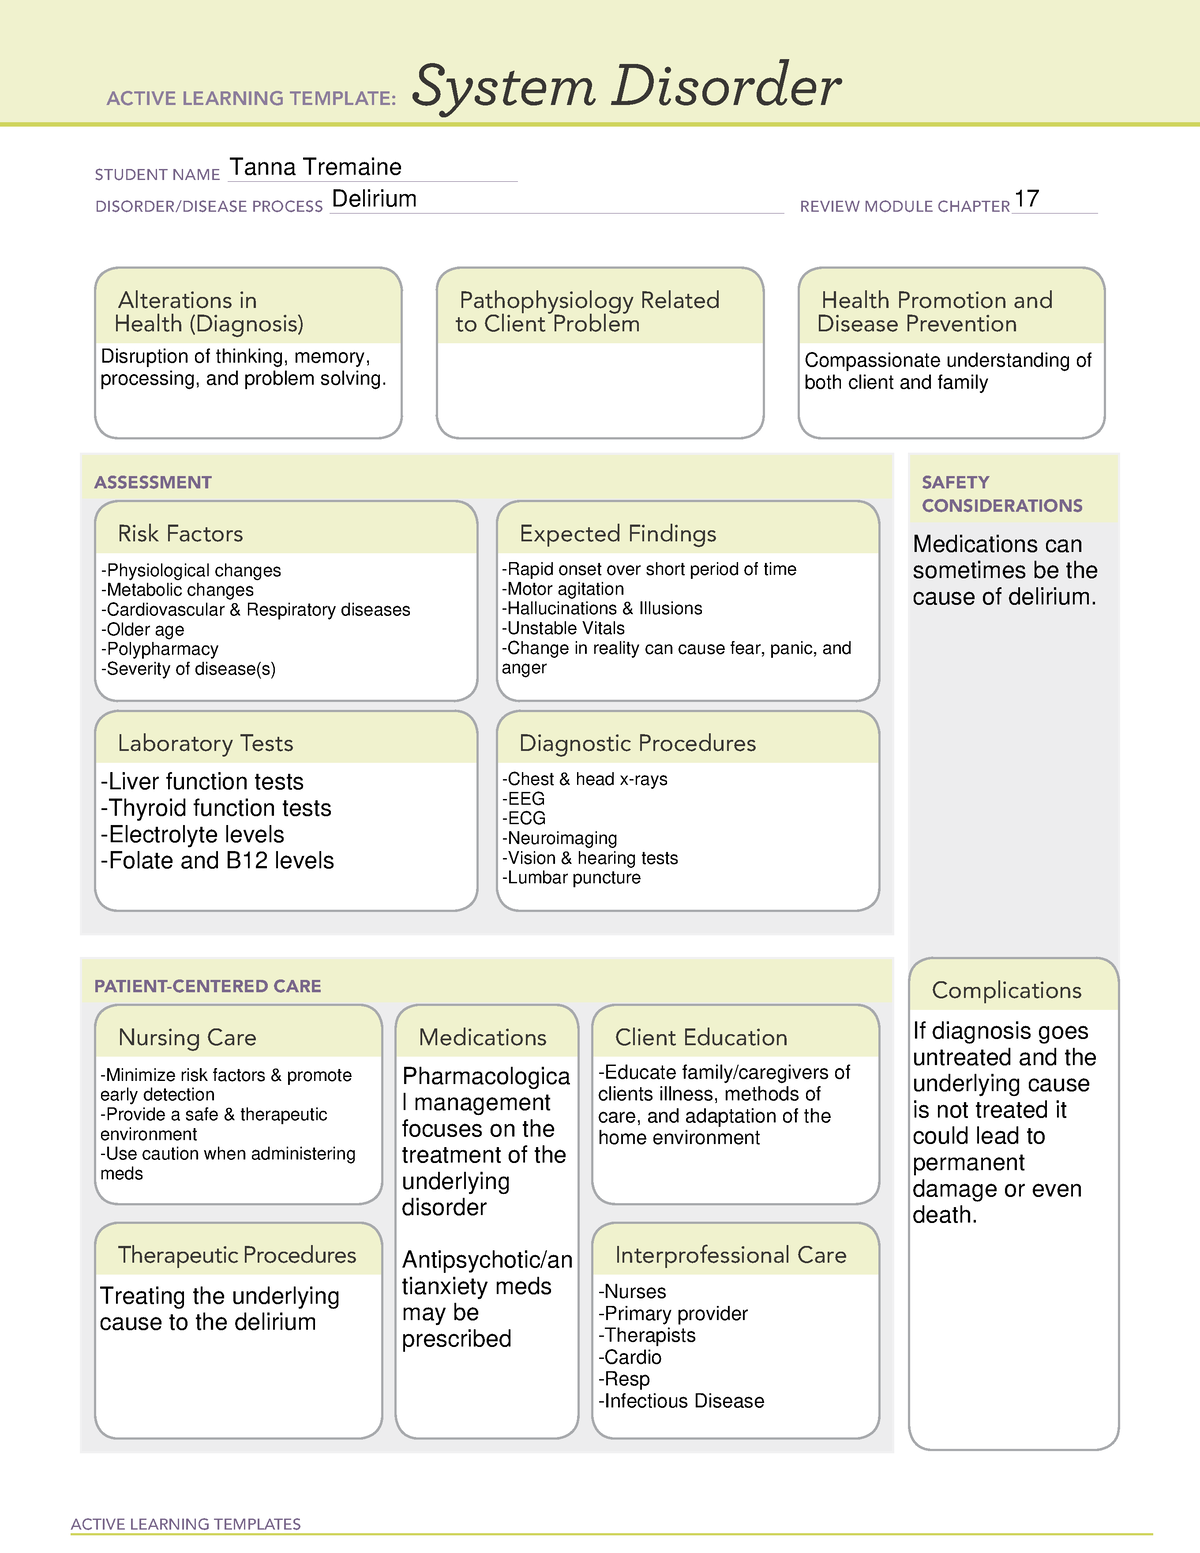 Delirium Medication Active Learning Template ACTIVE LEARNING